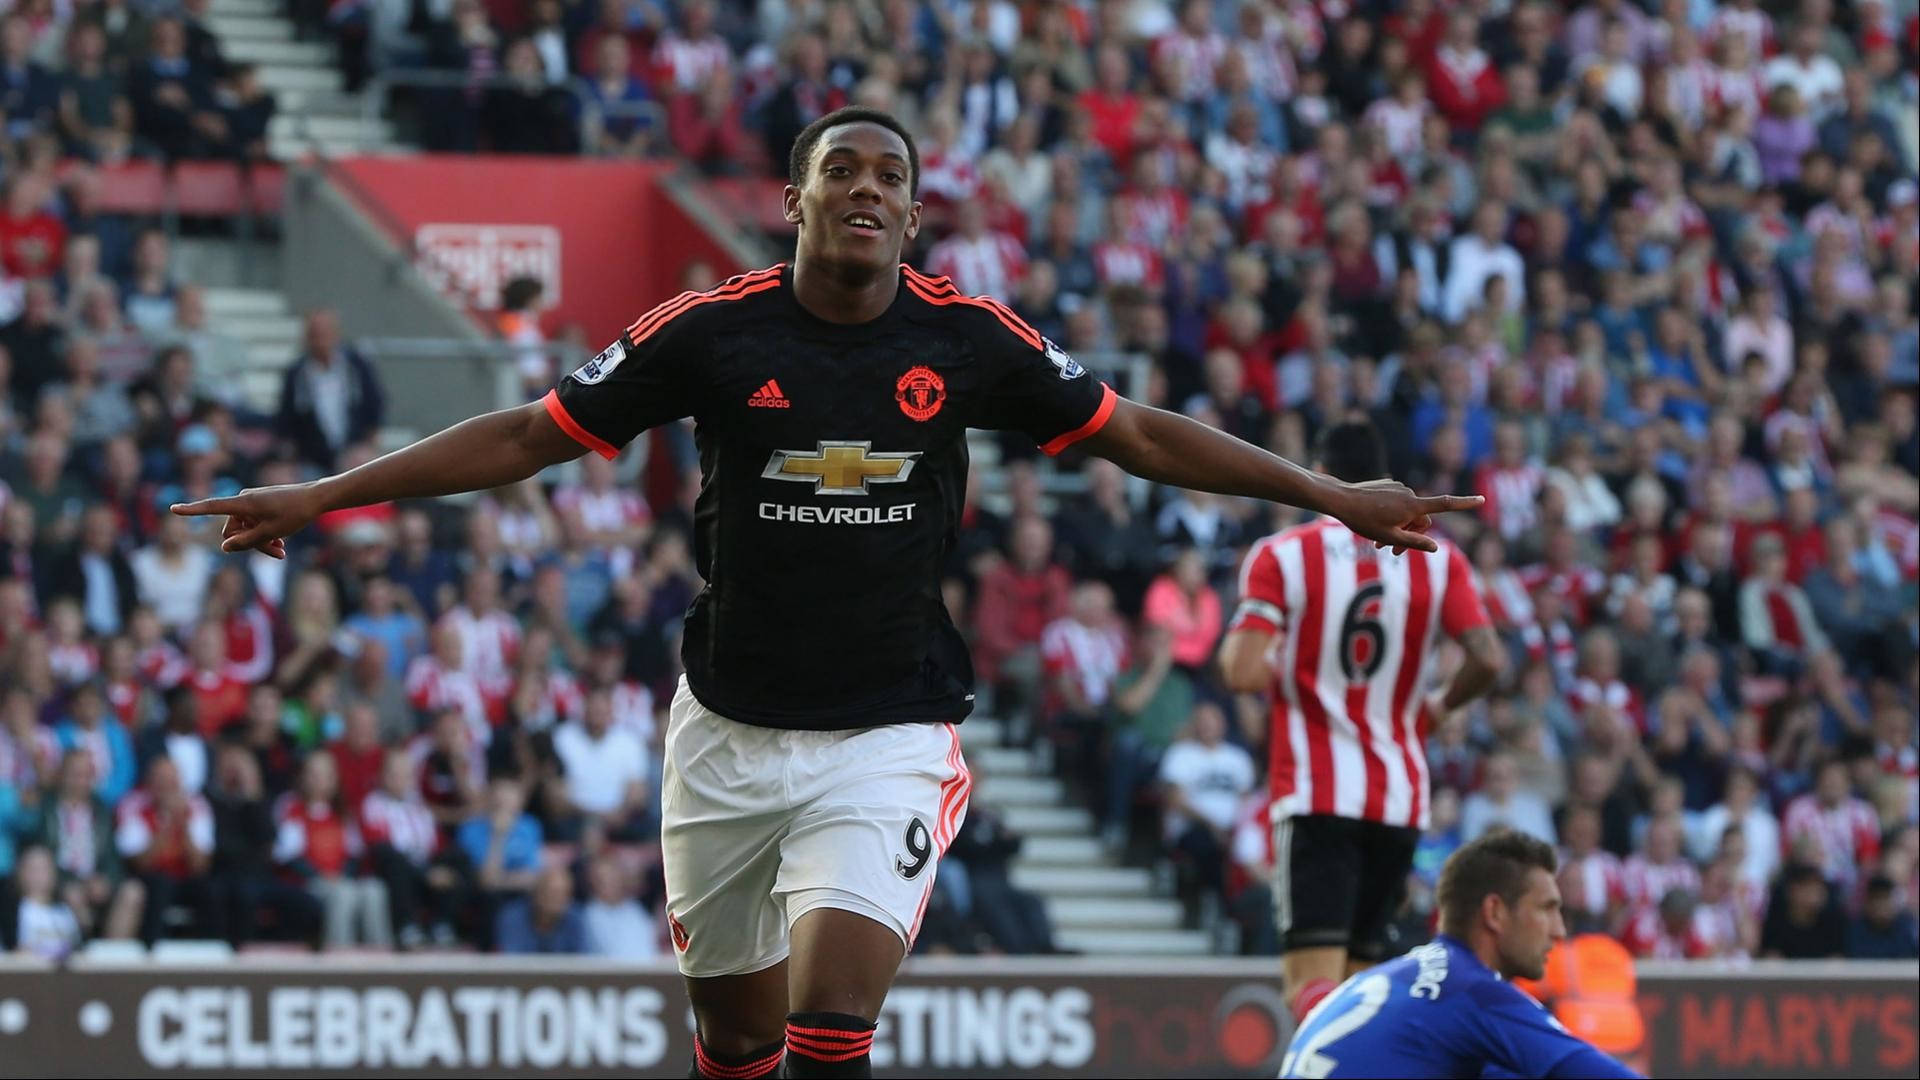 1920x1080 Anthony Martial HD Images : Get Free top quality Anthony Martial HD Images  for your desktop